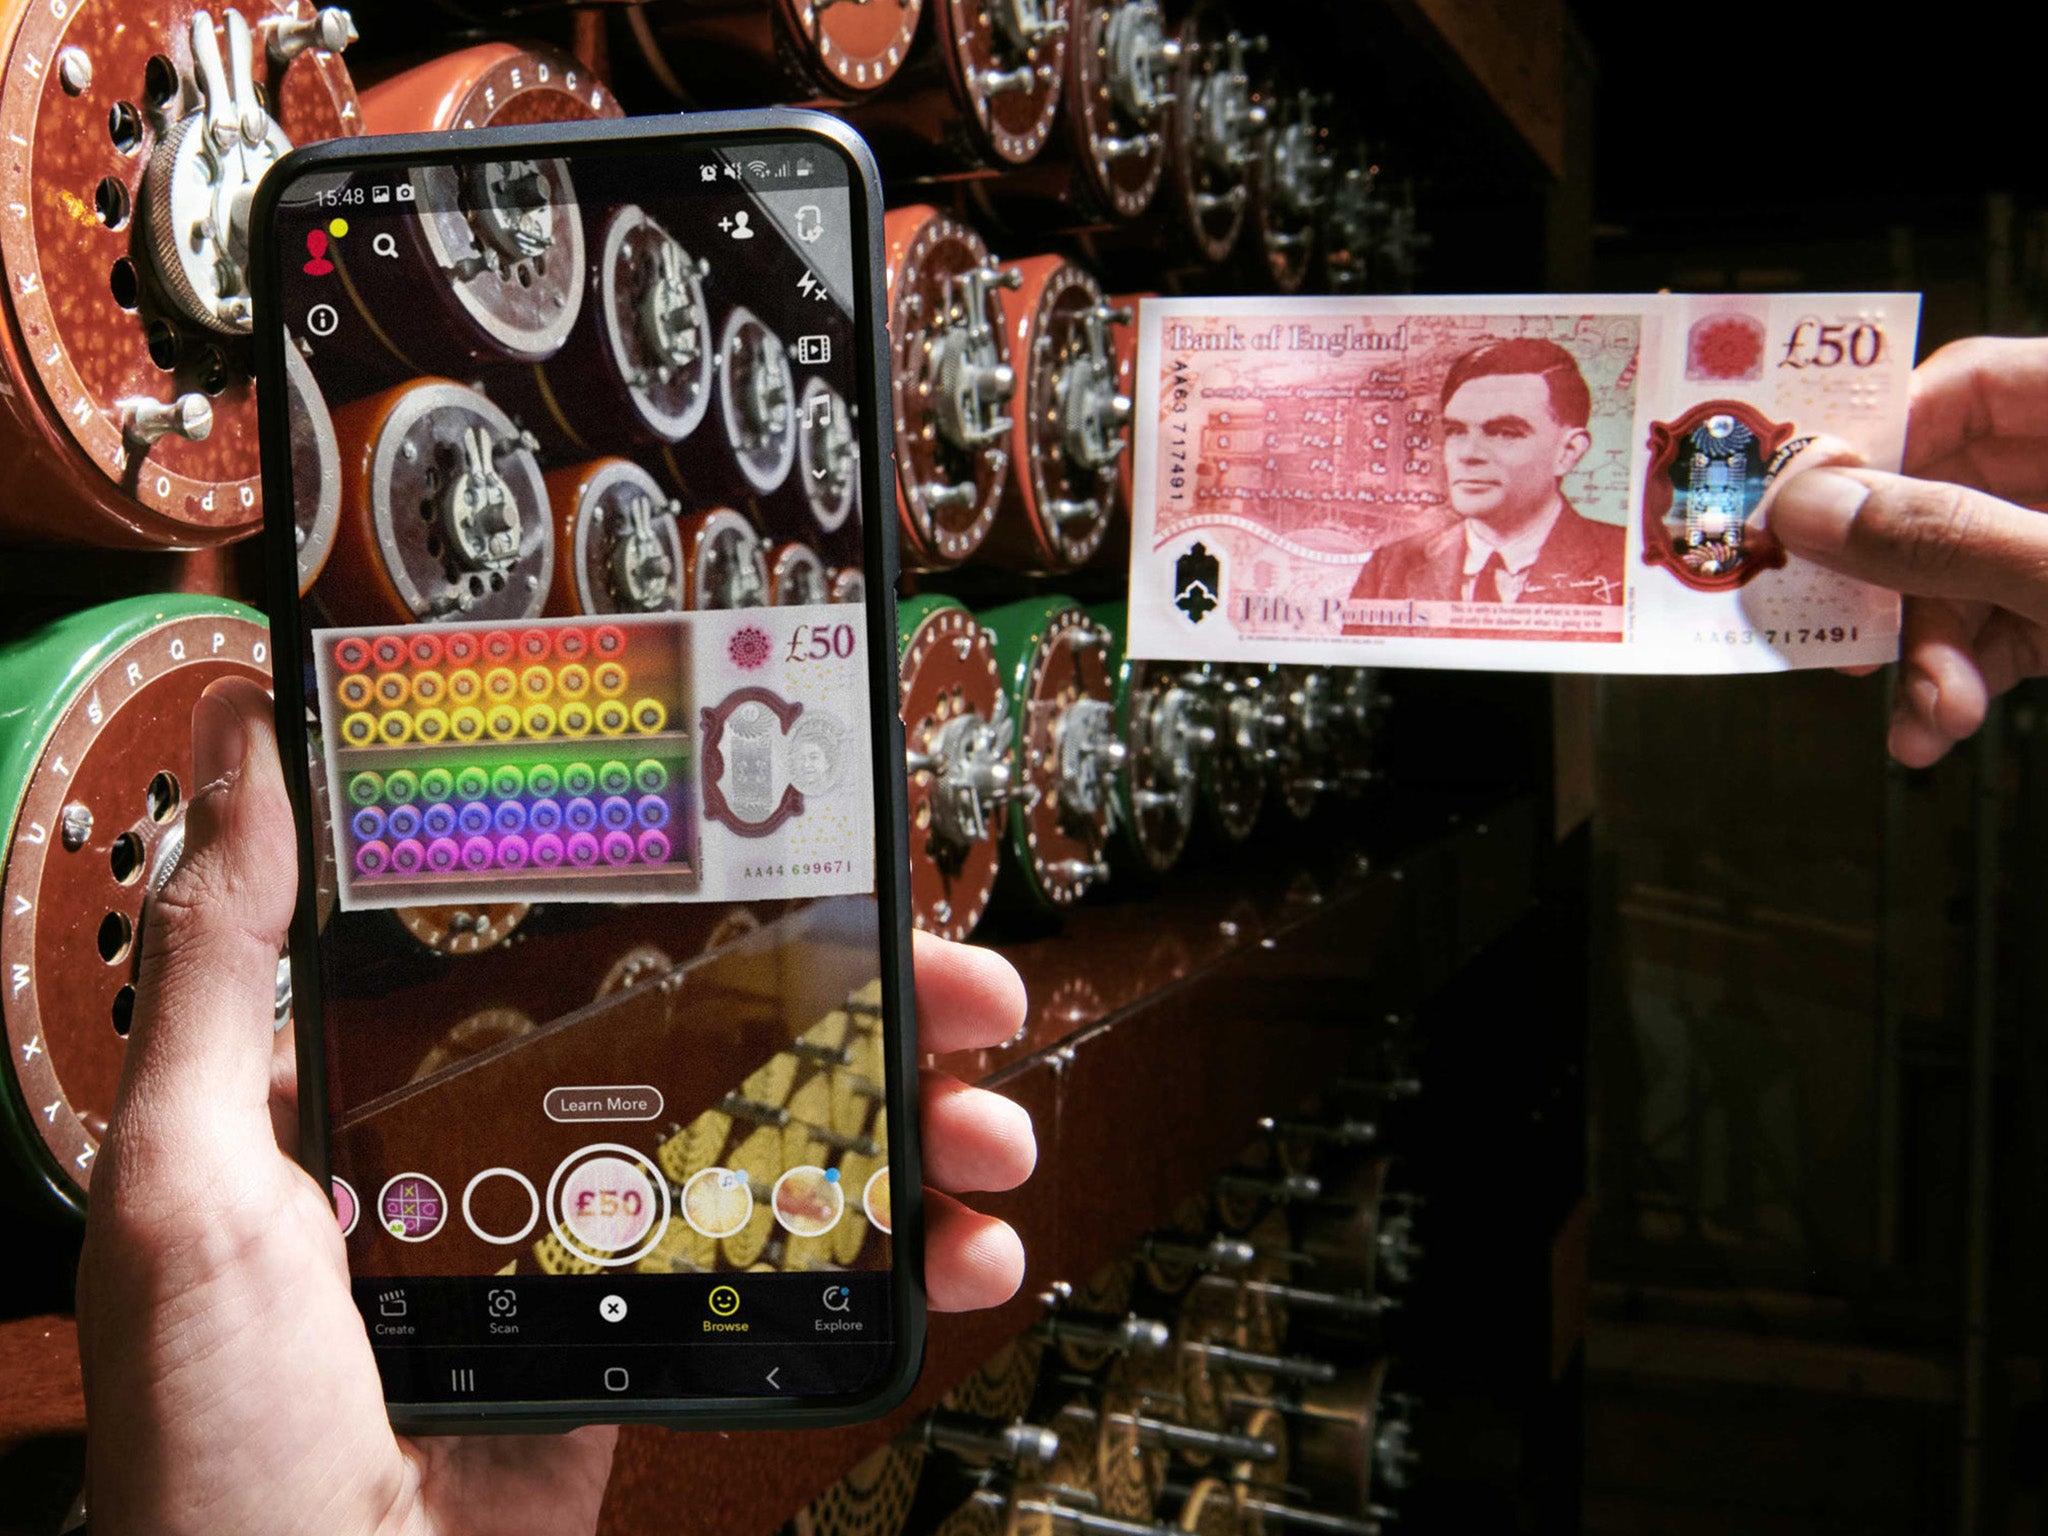 Snapchat has turned the new into an interactive celebration of Turing, creating an augmented reality lens for smartphones